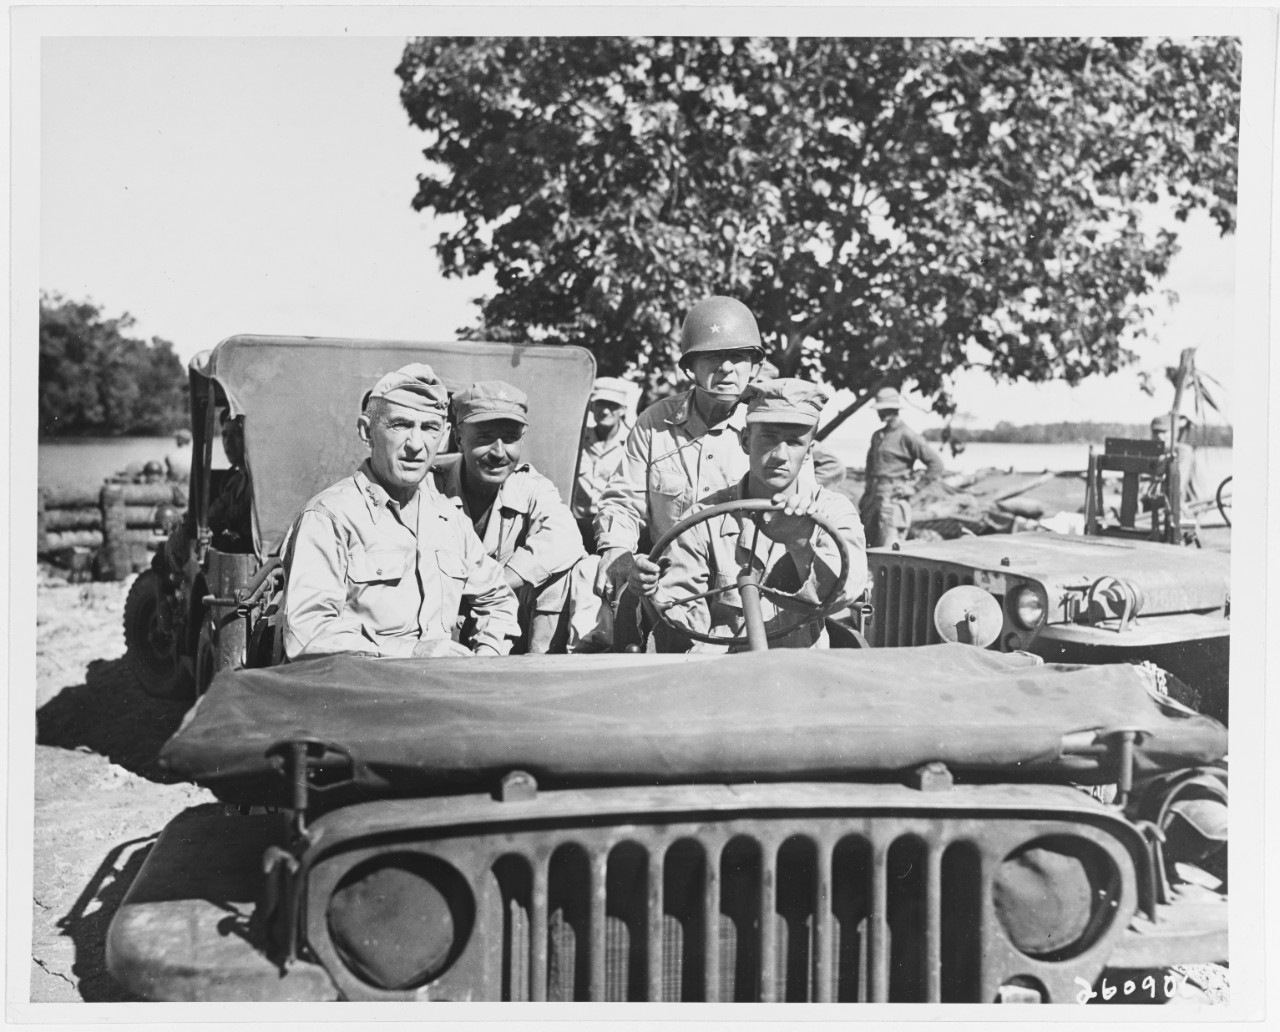 Lieutenant General Walter Krueger, Major General William Chase, Major General Innis P. Swift, start out on an inspection tour of Momote, Los Negros Island, Admiralty Group, March 18, 1944